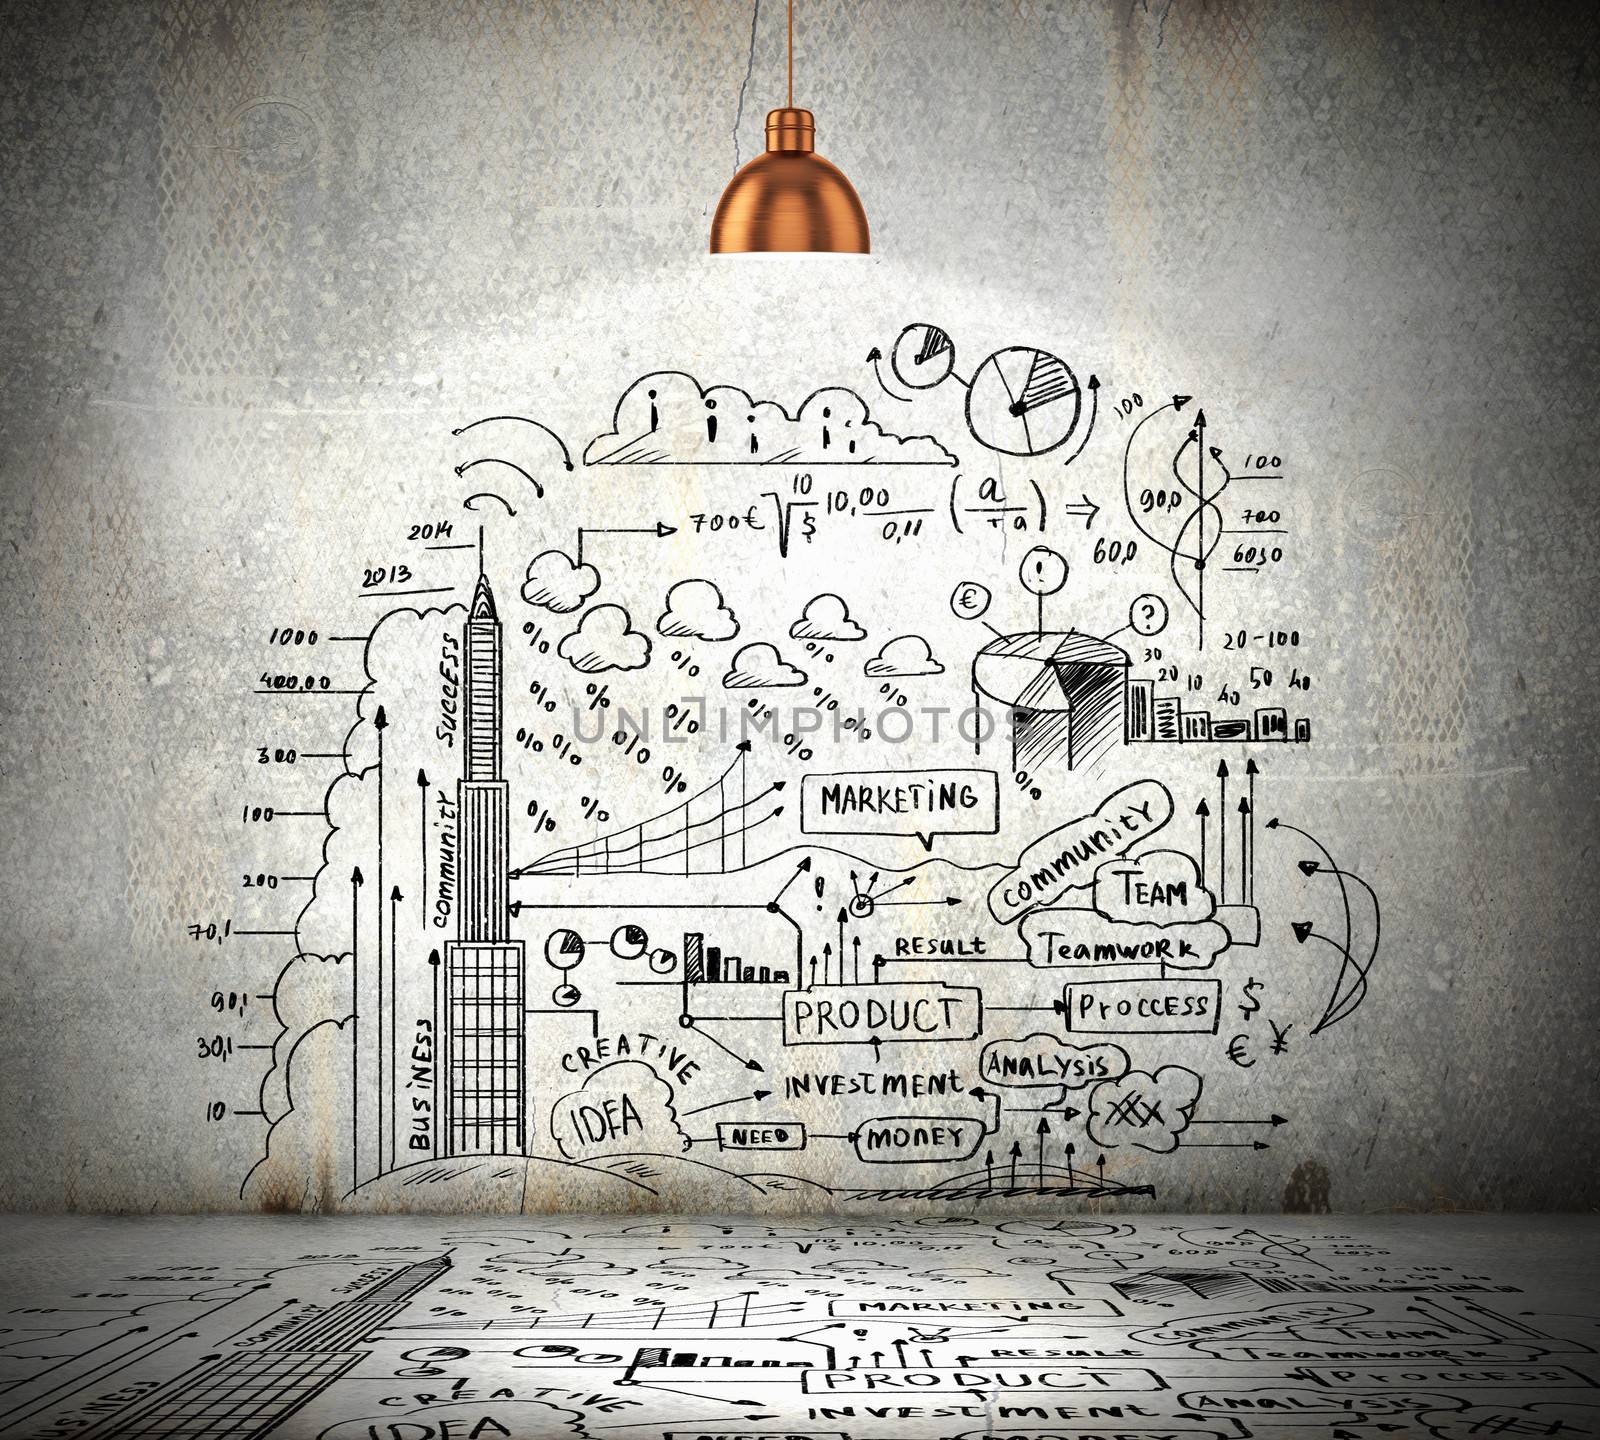 Drawn business plan on wall illuminated by lamp above